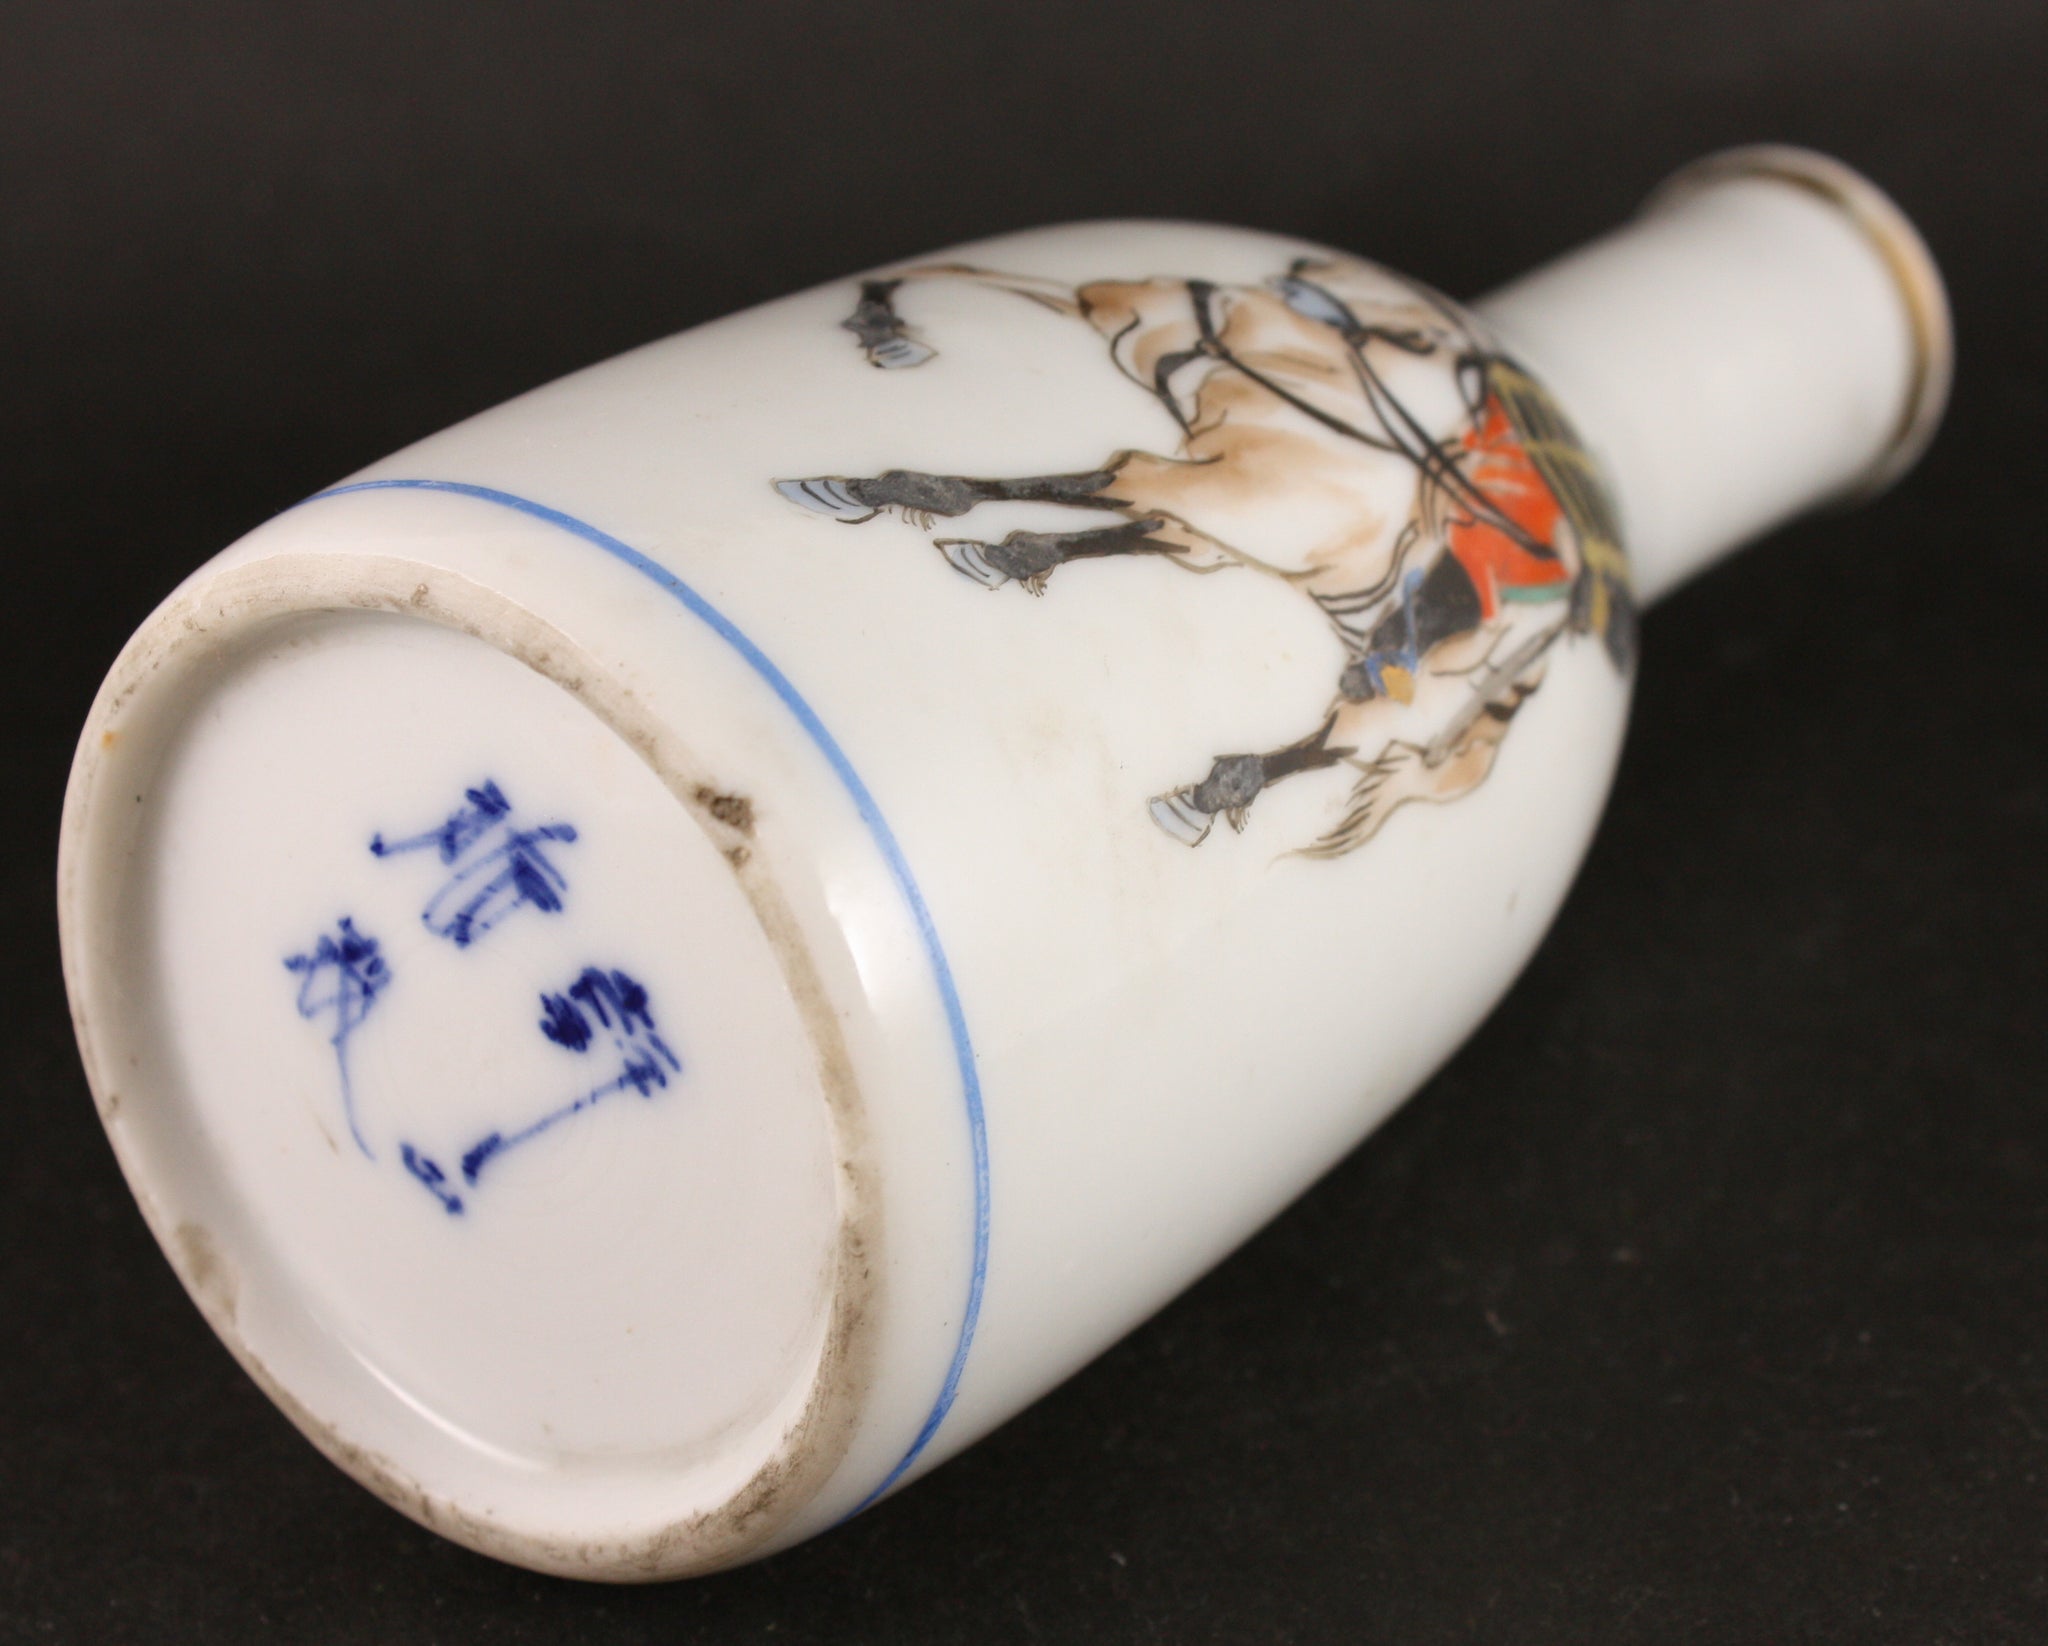 Very Rare Antique Japanese Military Meiji Era Hand Painted Cavalry Soldier Army Sake Bottle